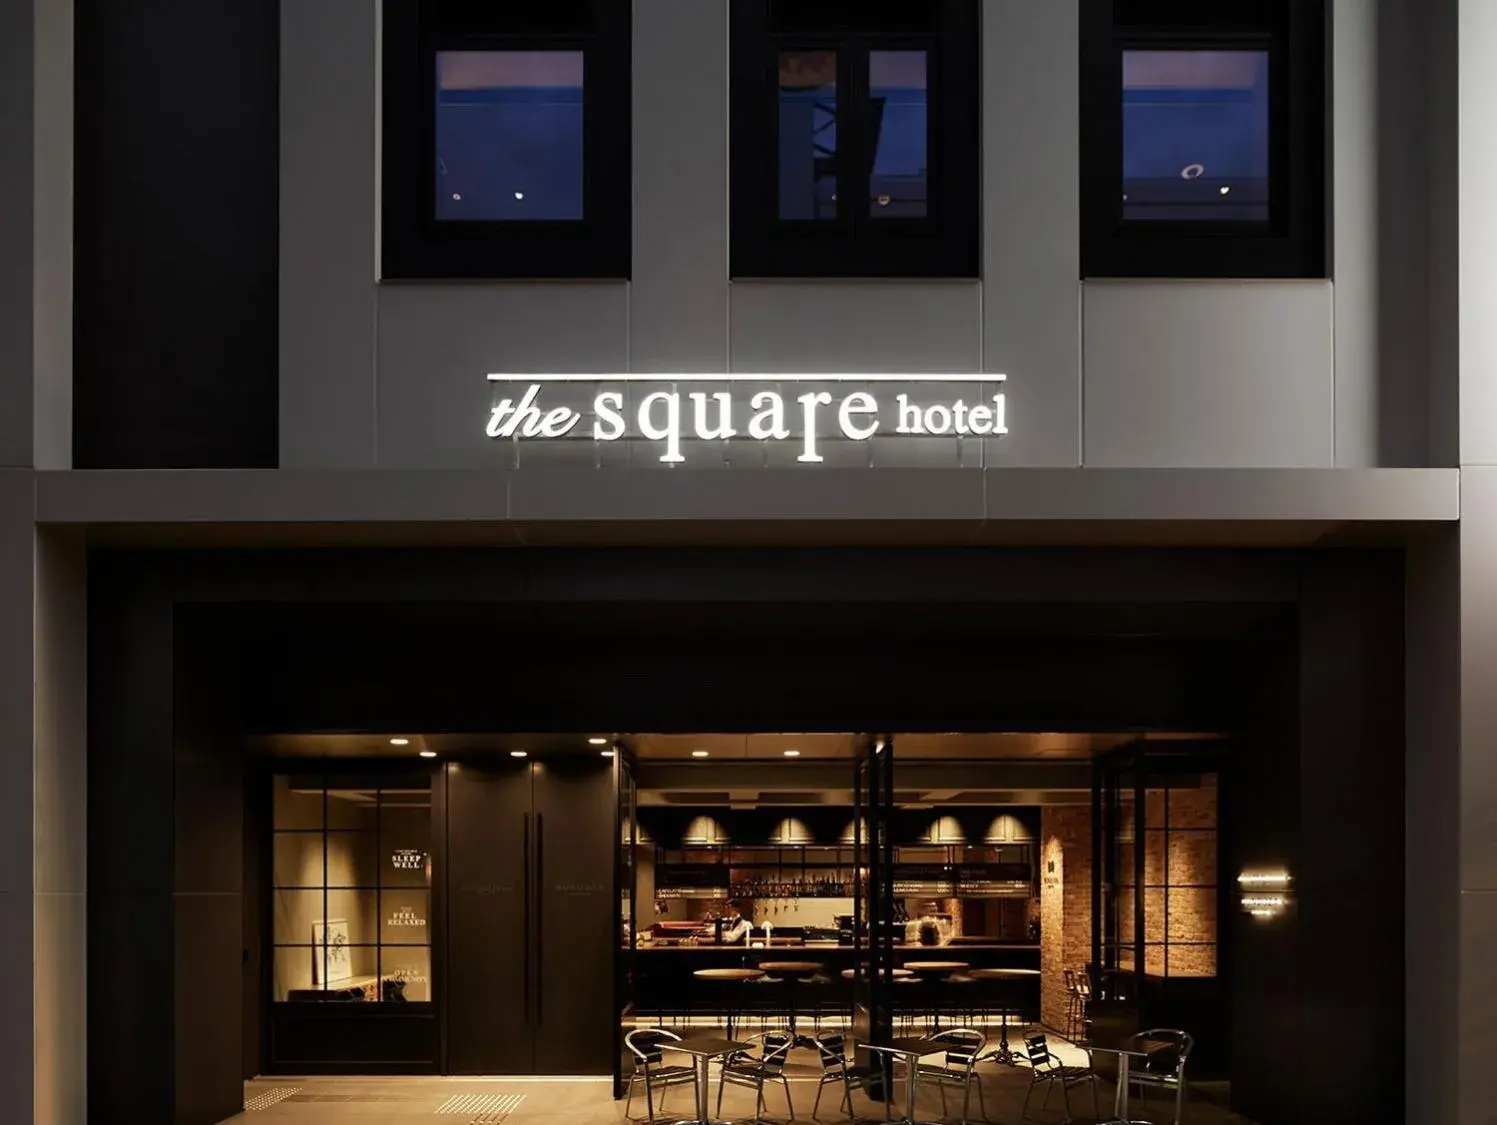 Facade/entrance in the square hotel GINZA